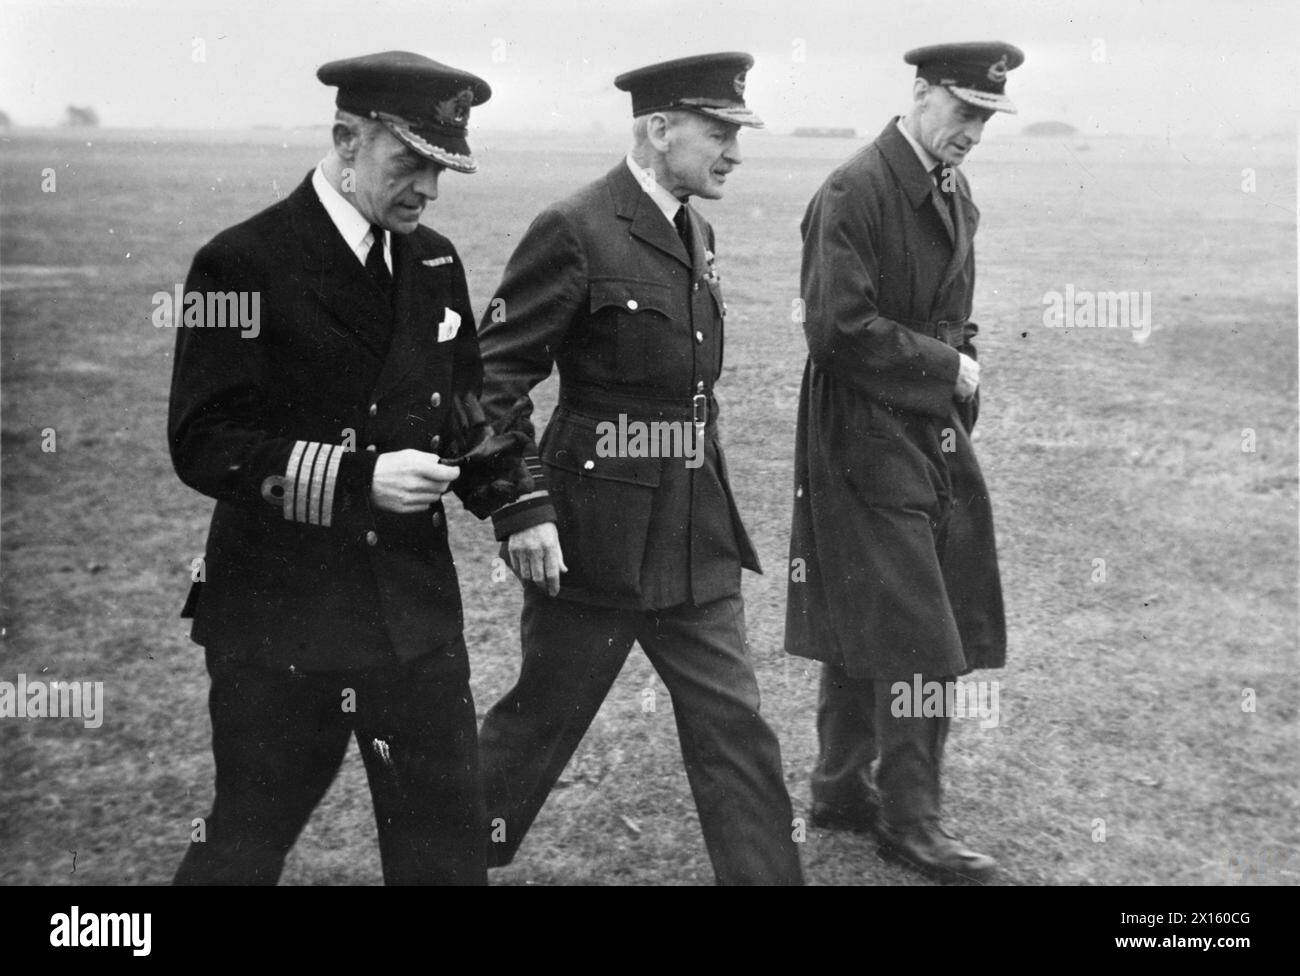 AIR CHIEF MARSHAL VISITS ATC AT ROYAL NAVAL AIR STATION. AUGUST 1944, ROYAL NAVAL AIR STATION YEOVILTON. THE VISIT OF AIR CHIEF MARSHAL SIR ROBERT BROOK POPHAM, GCVO, TO INSPECT MEMBERS OF THE ATC IN CAMP AT YEOVILTON. - The Air Chief Marshal (centre) accompanied by Captain C L Keighly-Peach, DSO, OBE, RN (left) and Air Commodore Smythe-Osborne, AOC South West Command ATC on their way to inspect the ATC Stock Photo